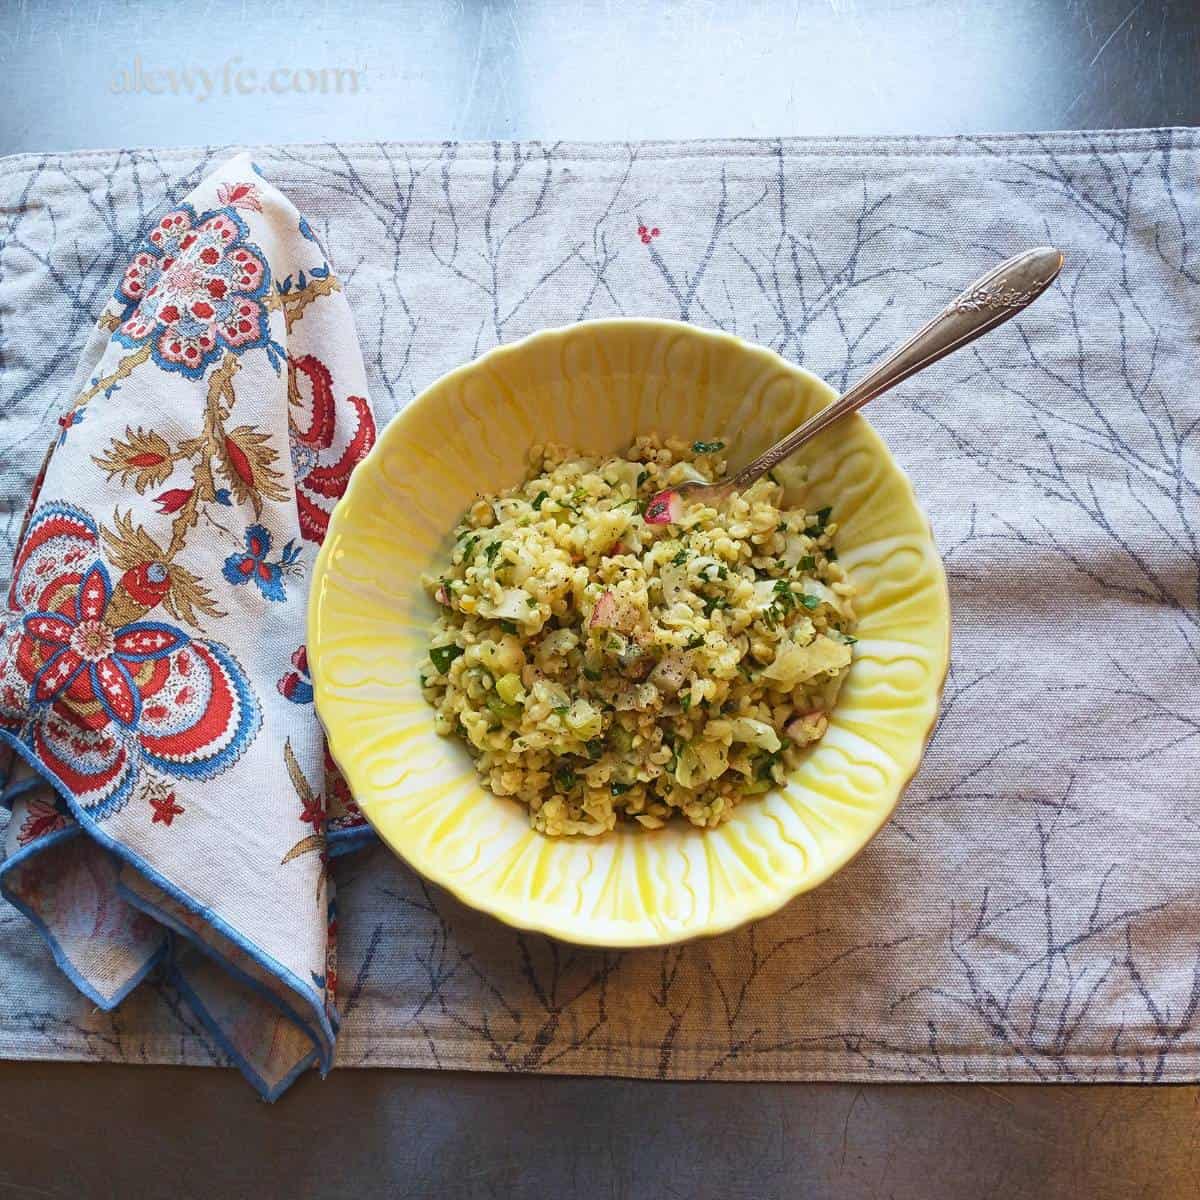 A bowl of winter tabbouleh salad on a placemat with a winter tree print, and a brightly colored paisley fabric napkin.